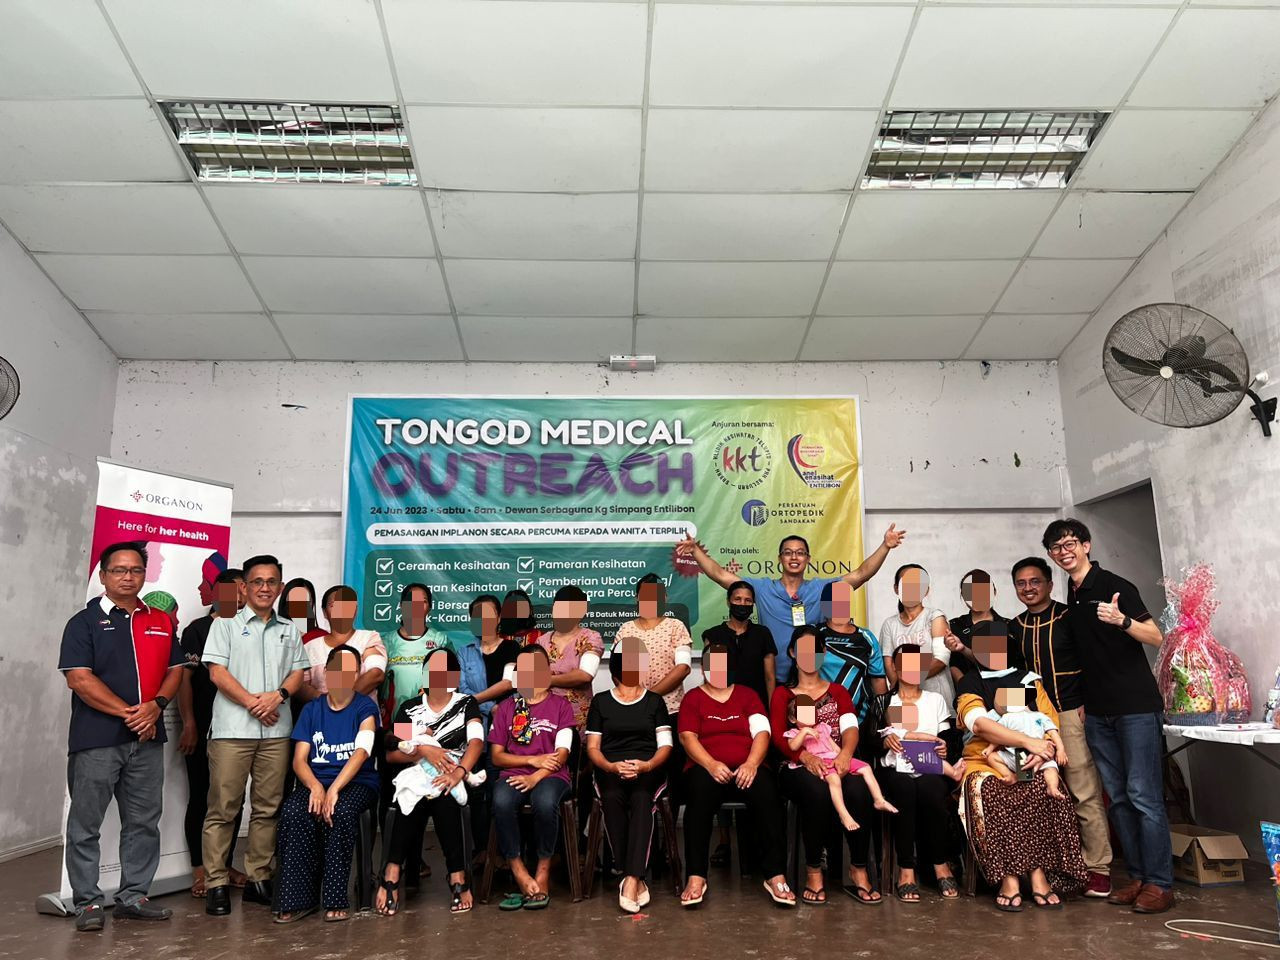 Dr Timothy Cheng (in blue, standing) hopes the outreach programme would also become an eye-opener for the government and MoH on the need for more contraceptive supplies in interior areas in Sabah such as Tongod. – Sandakan Orthopaedic Association pic, July 1, 2023